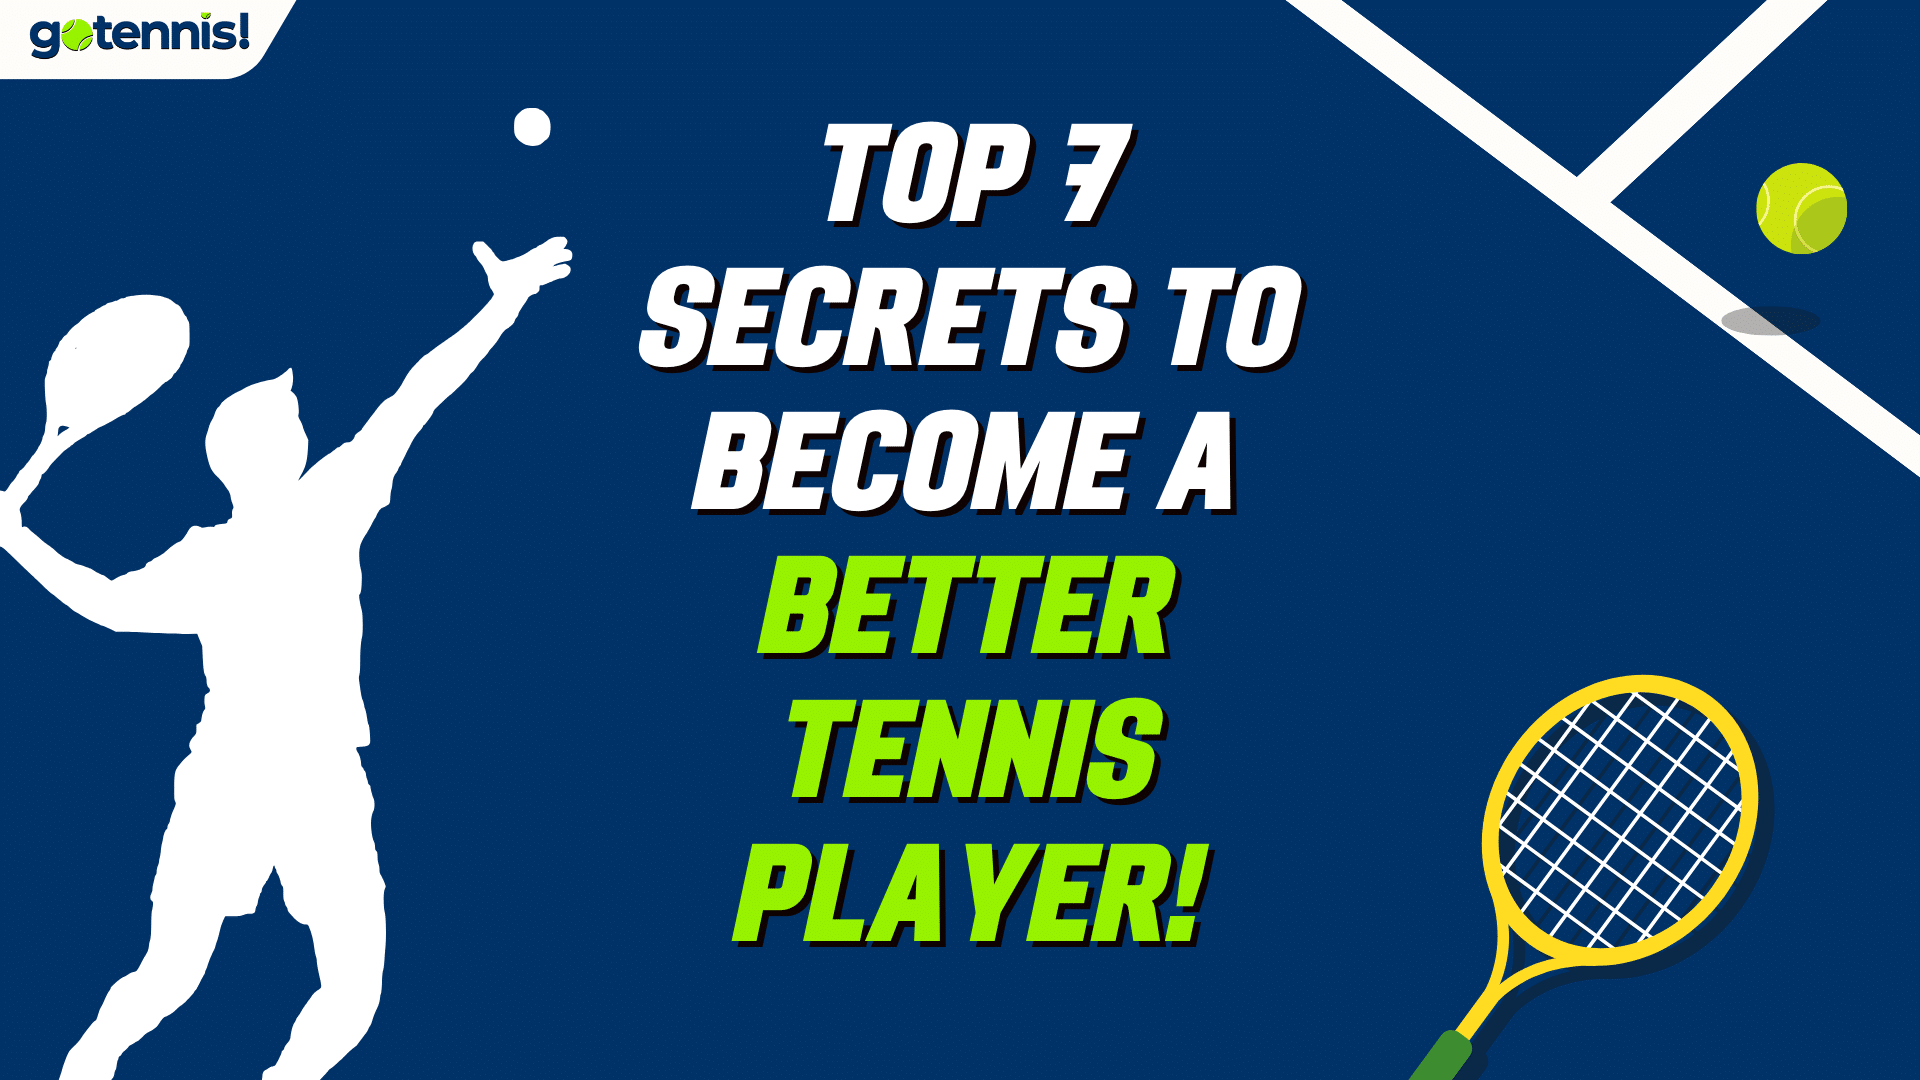 Top 7 Secrets to Become a Better Tennis Player Need to know!